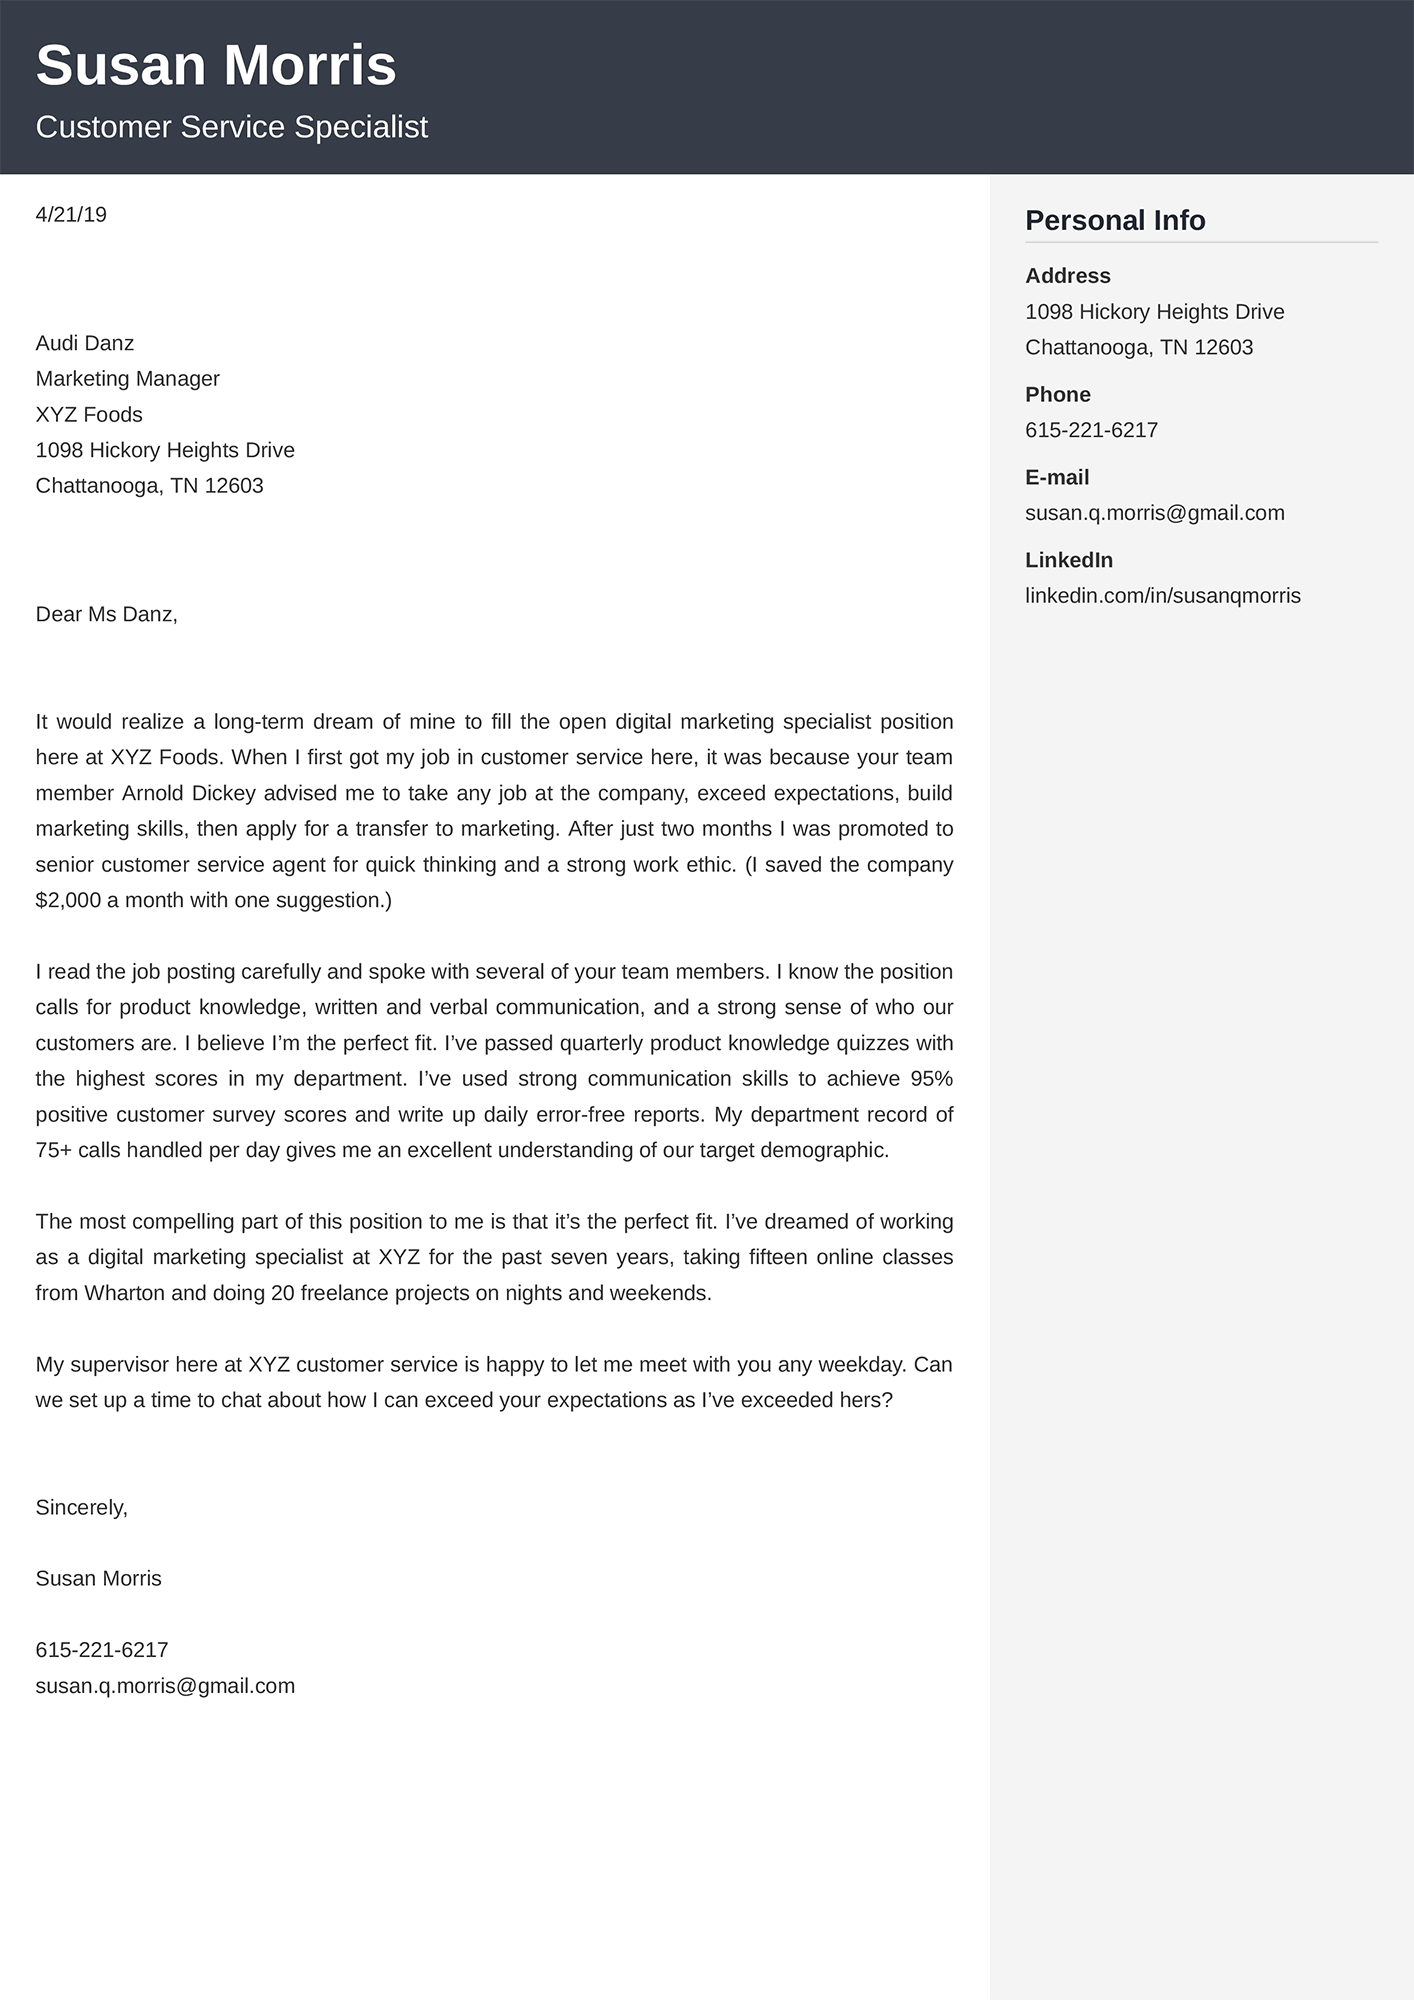 Sample Marketing Cover Letter from cdn-images.zety.com